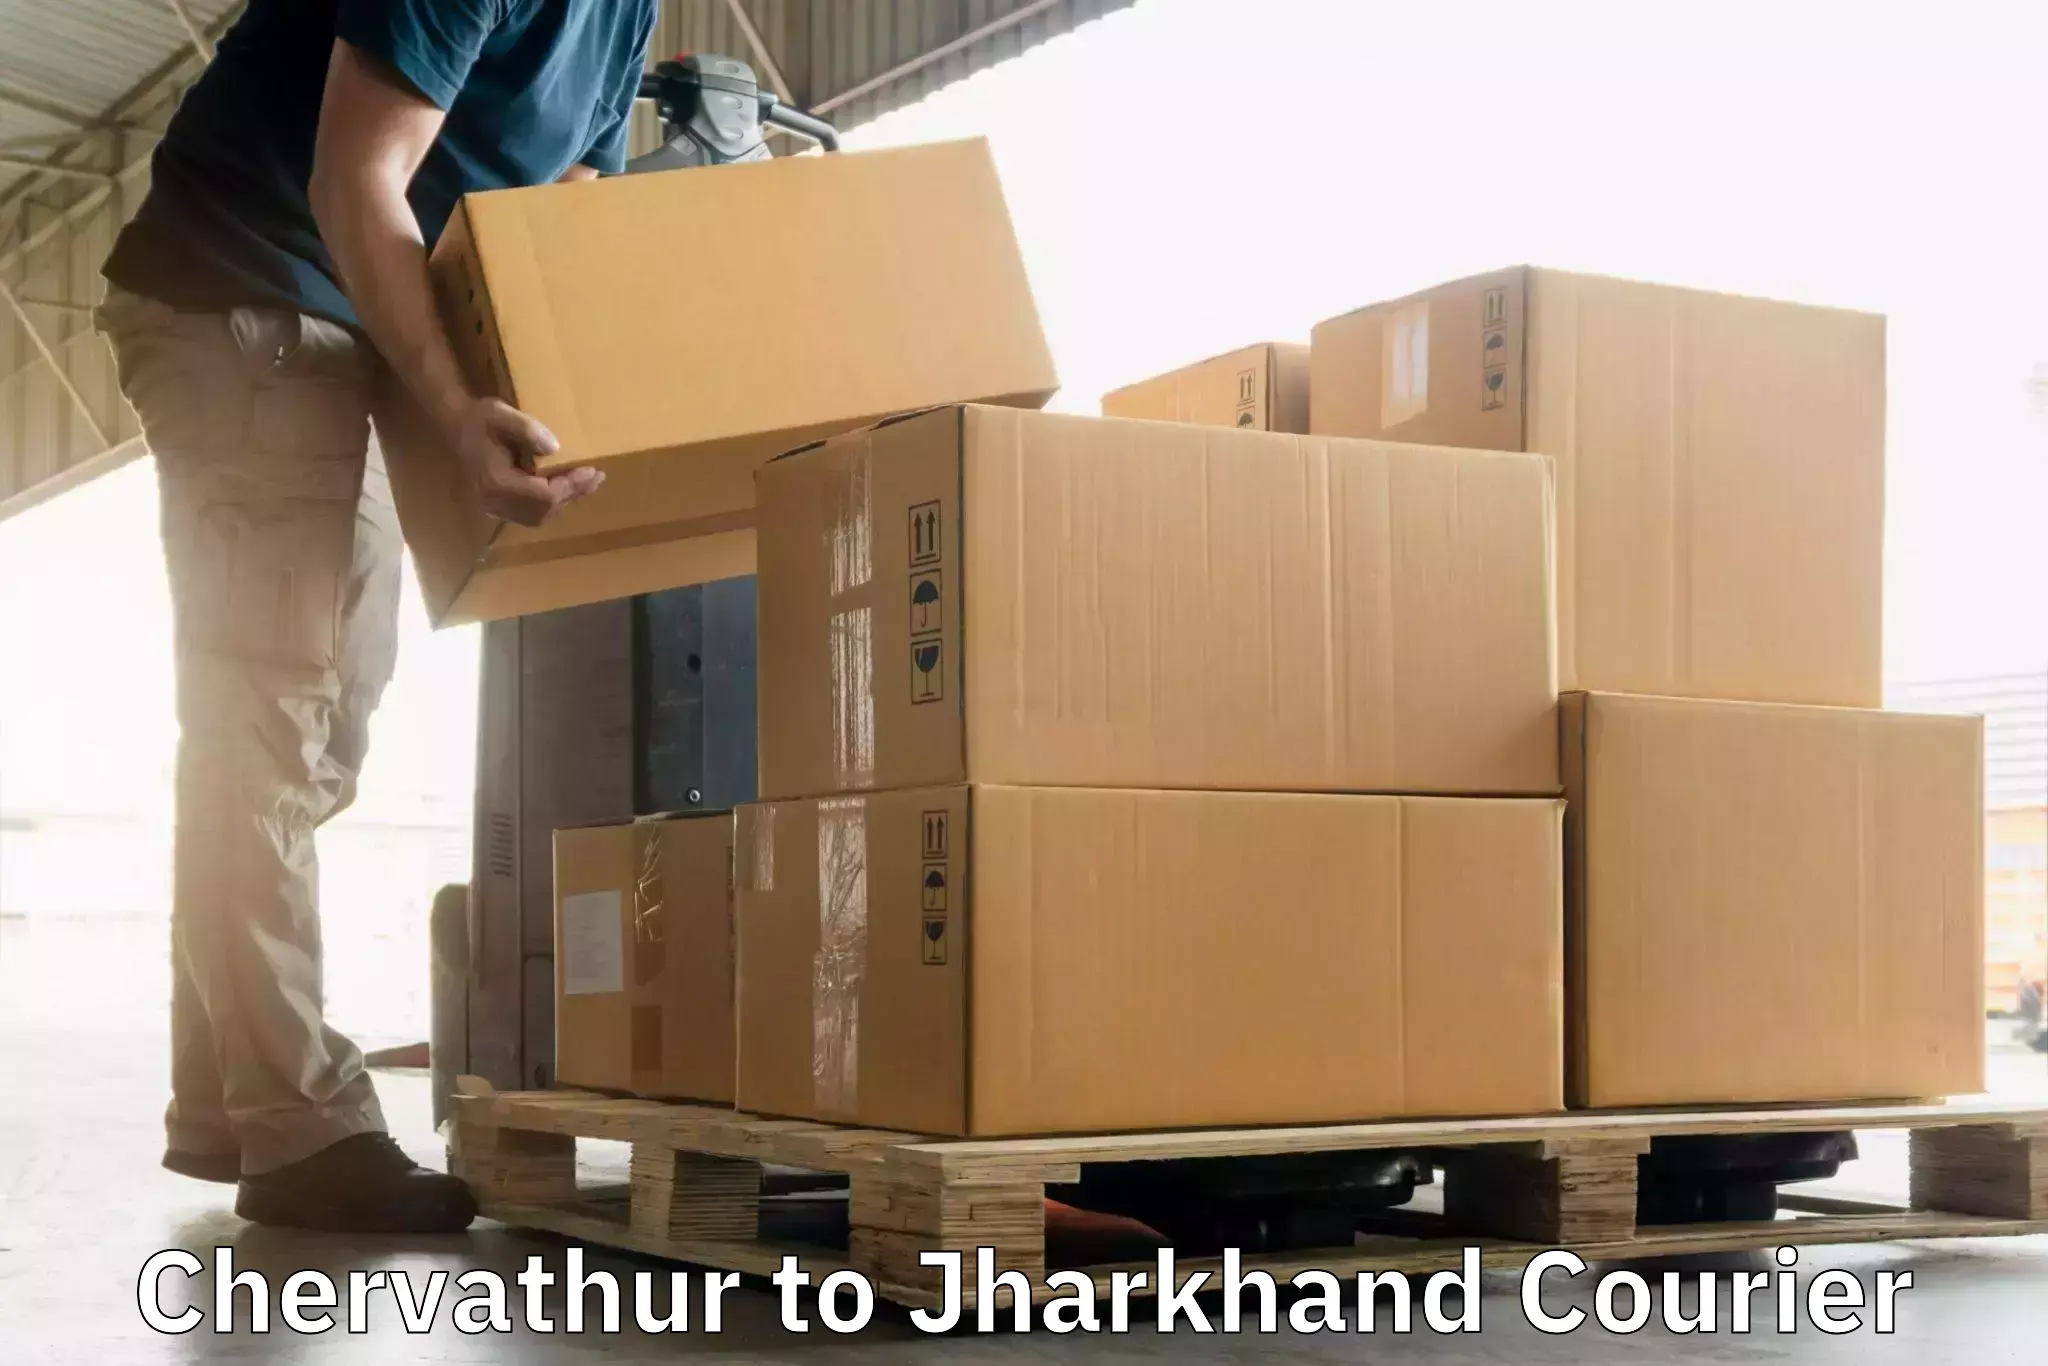 State-of-the-art courier technology Chervathur to Latehar